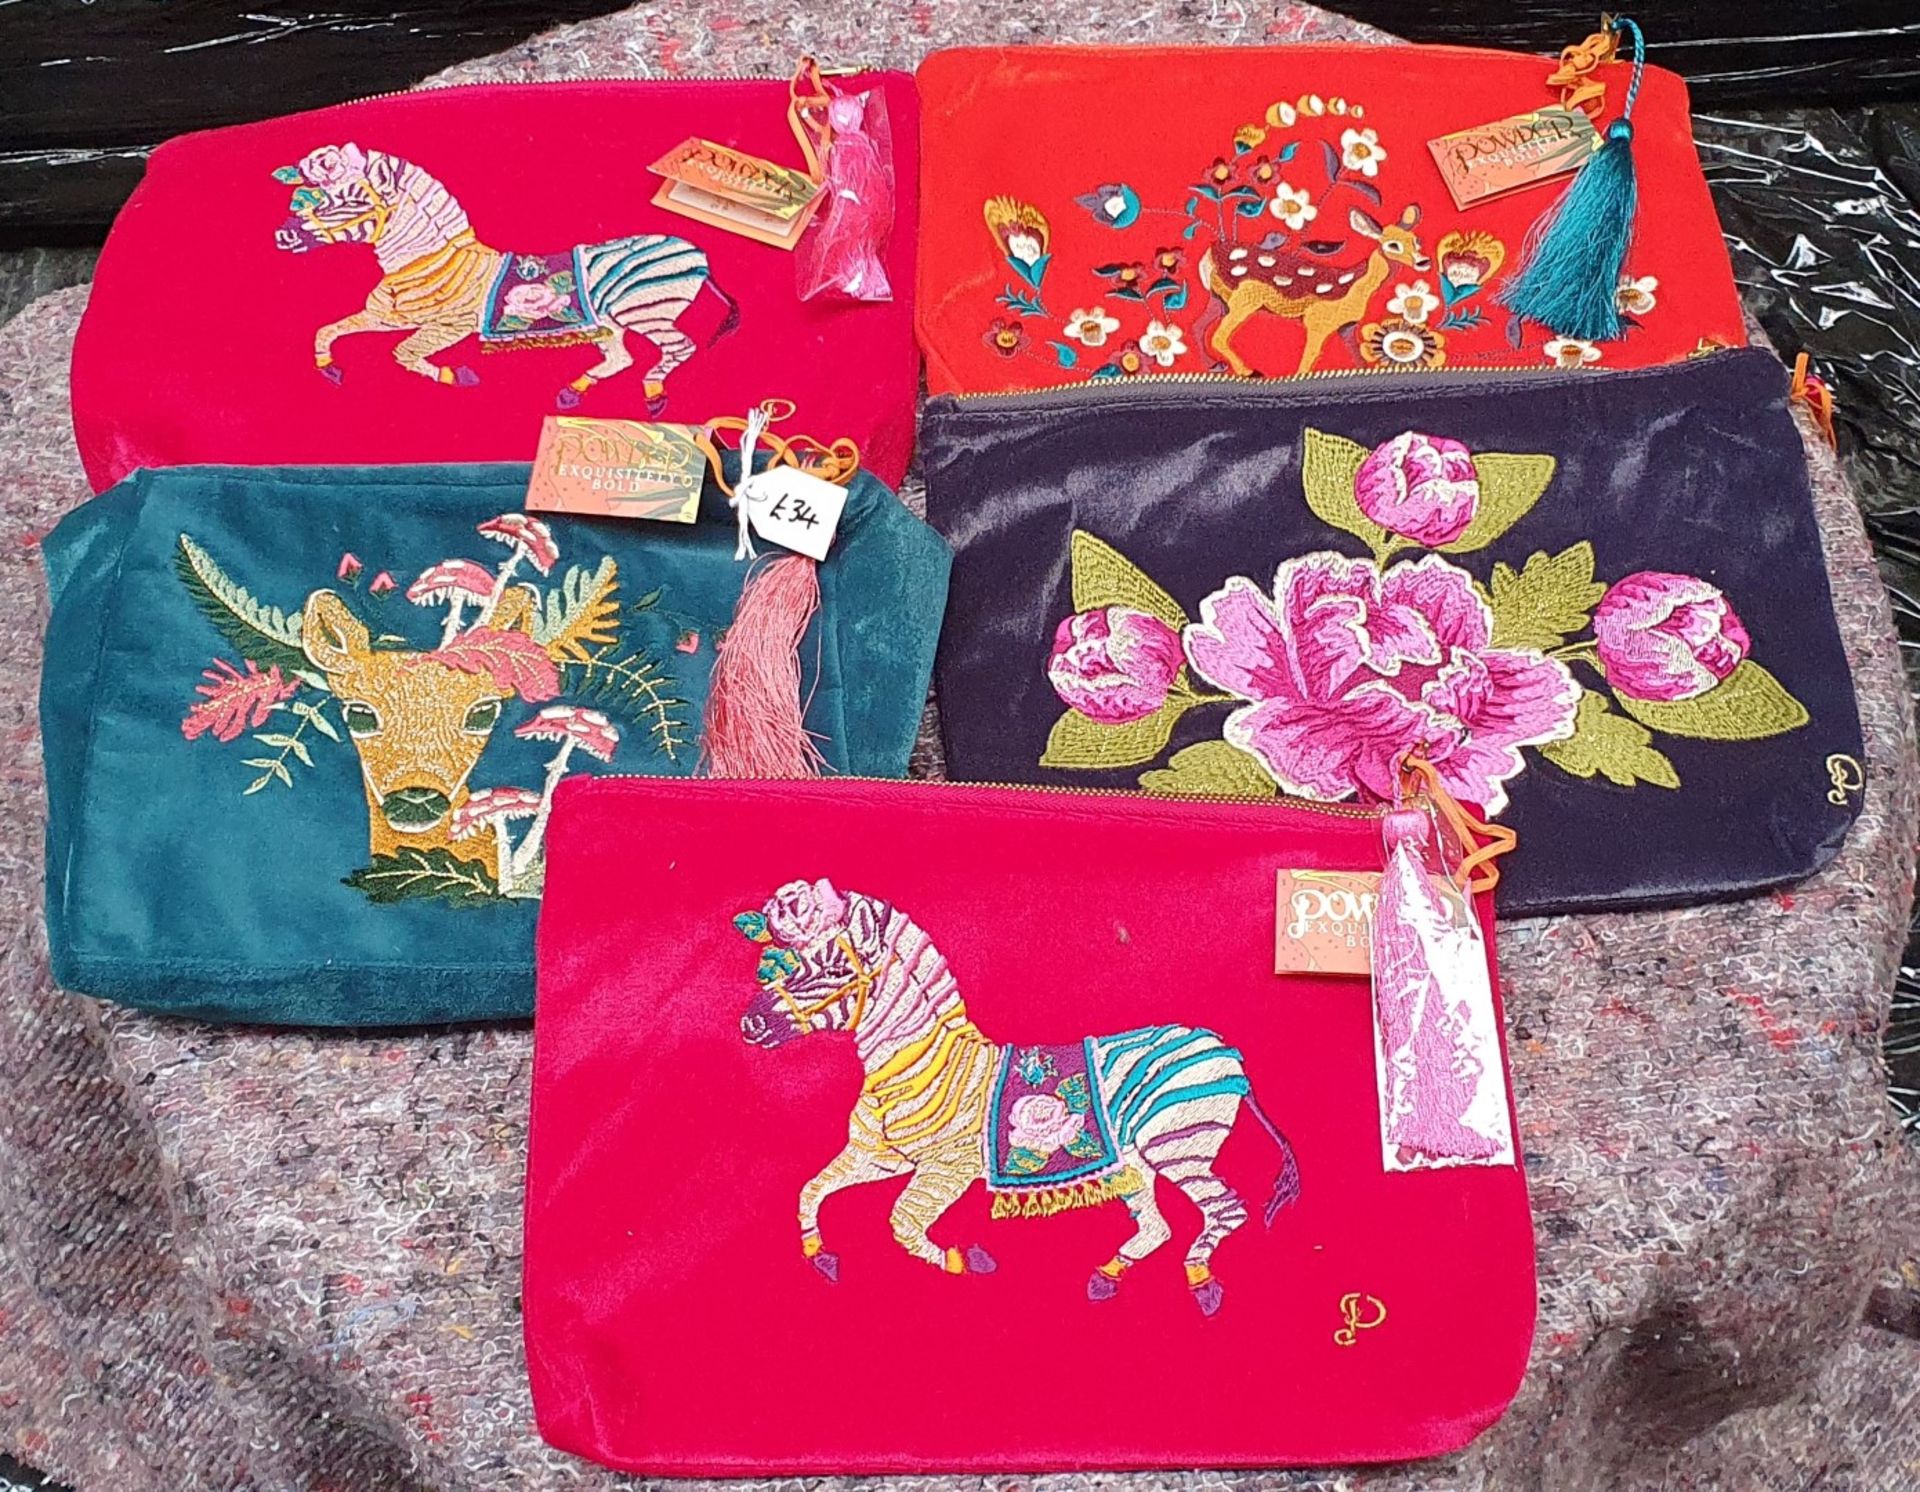 5 x Toiletries Bags By Powder Featuring a Velvet Material and Animal / Floral Stitched Designs - New